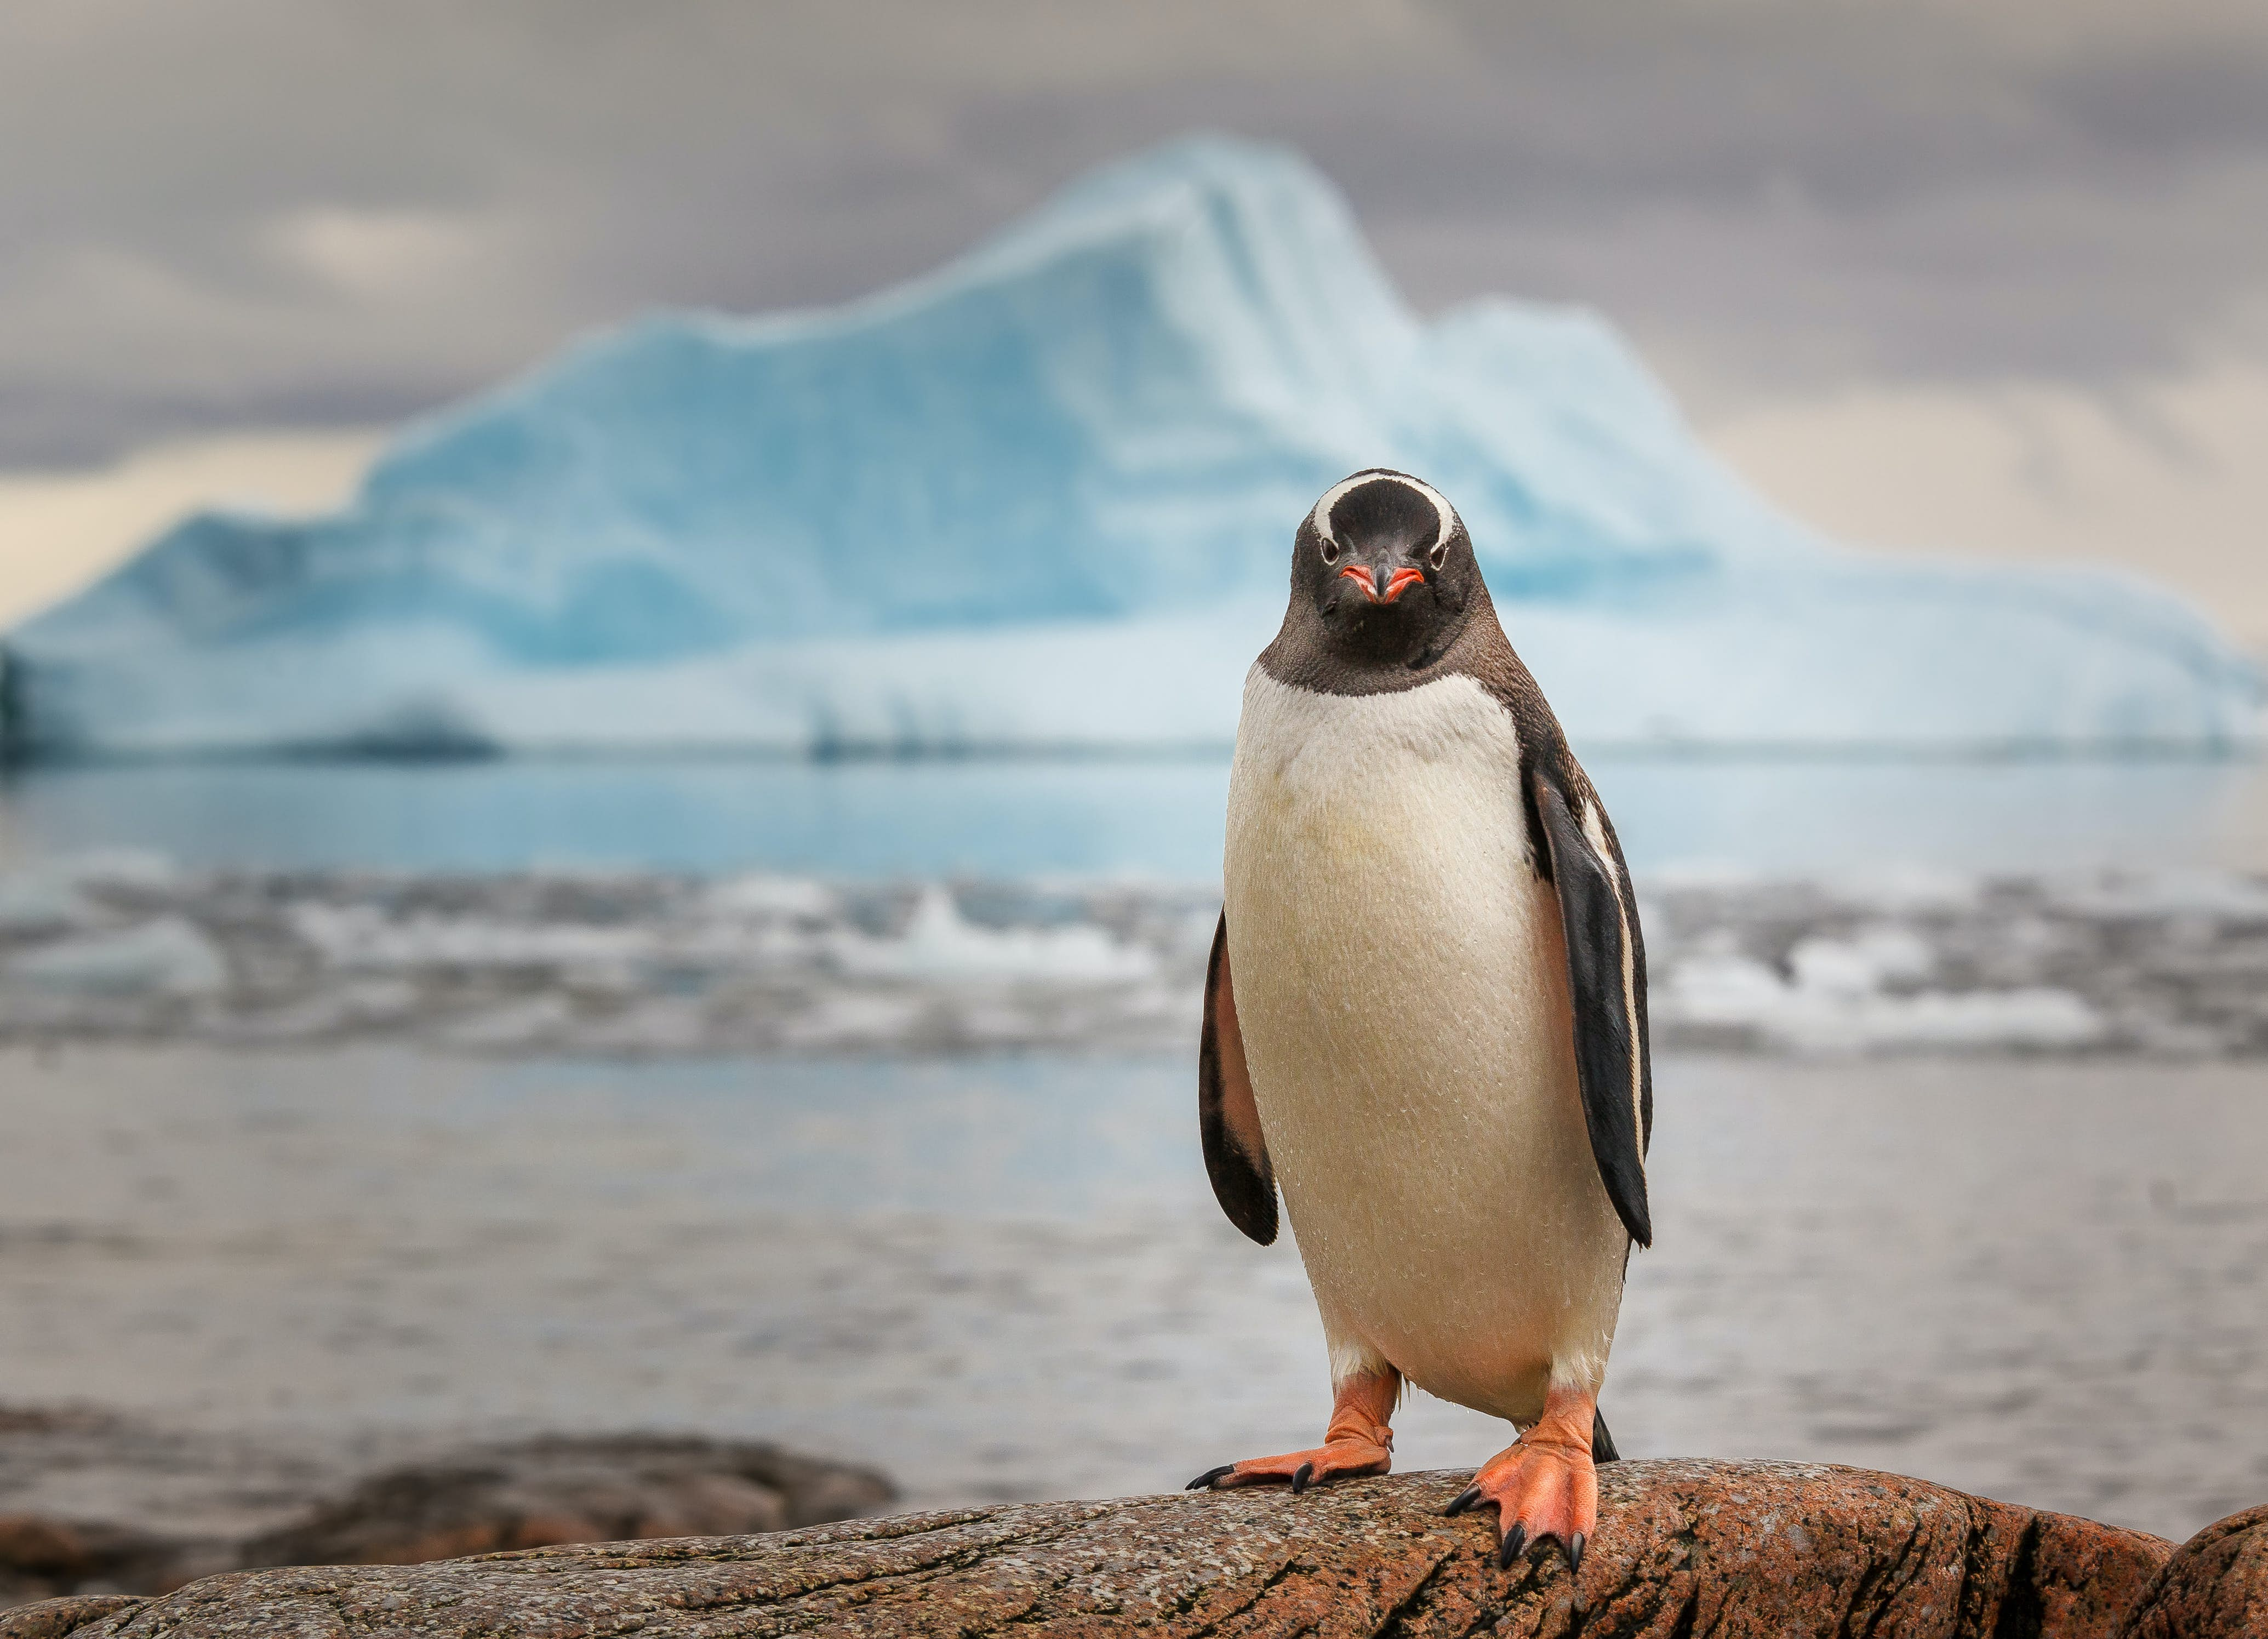 General 4139x2991 penguins iceberg nature looking at viewer snow ice ocean view animals landscape birds water cold rocks Arctic blurred Tux closeup